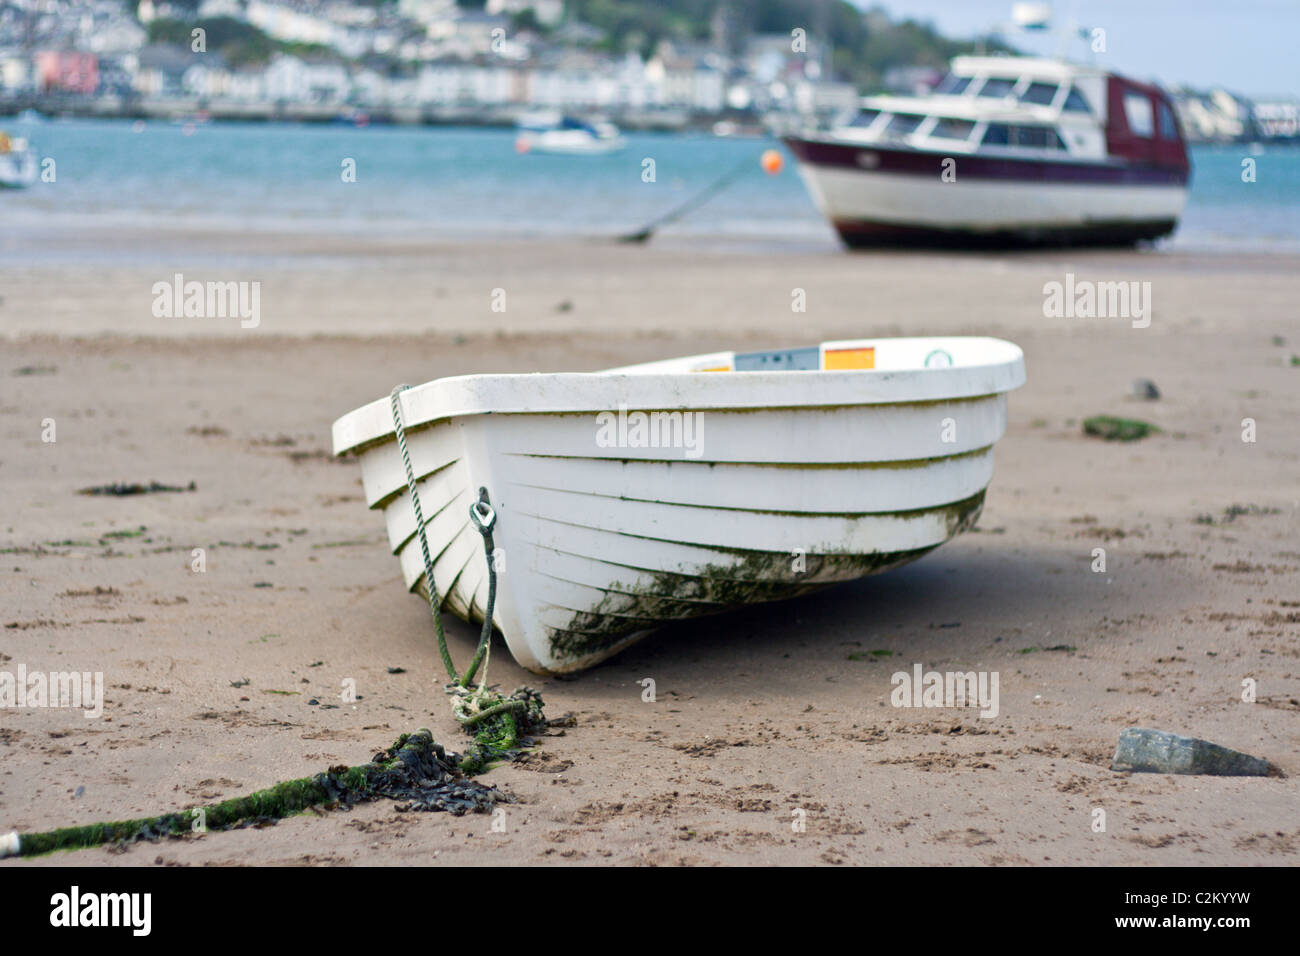 Rowing boat on beach Stock Photo